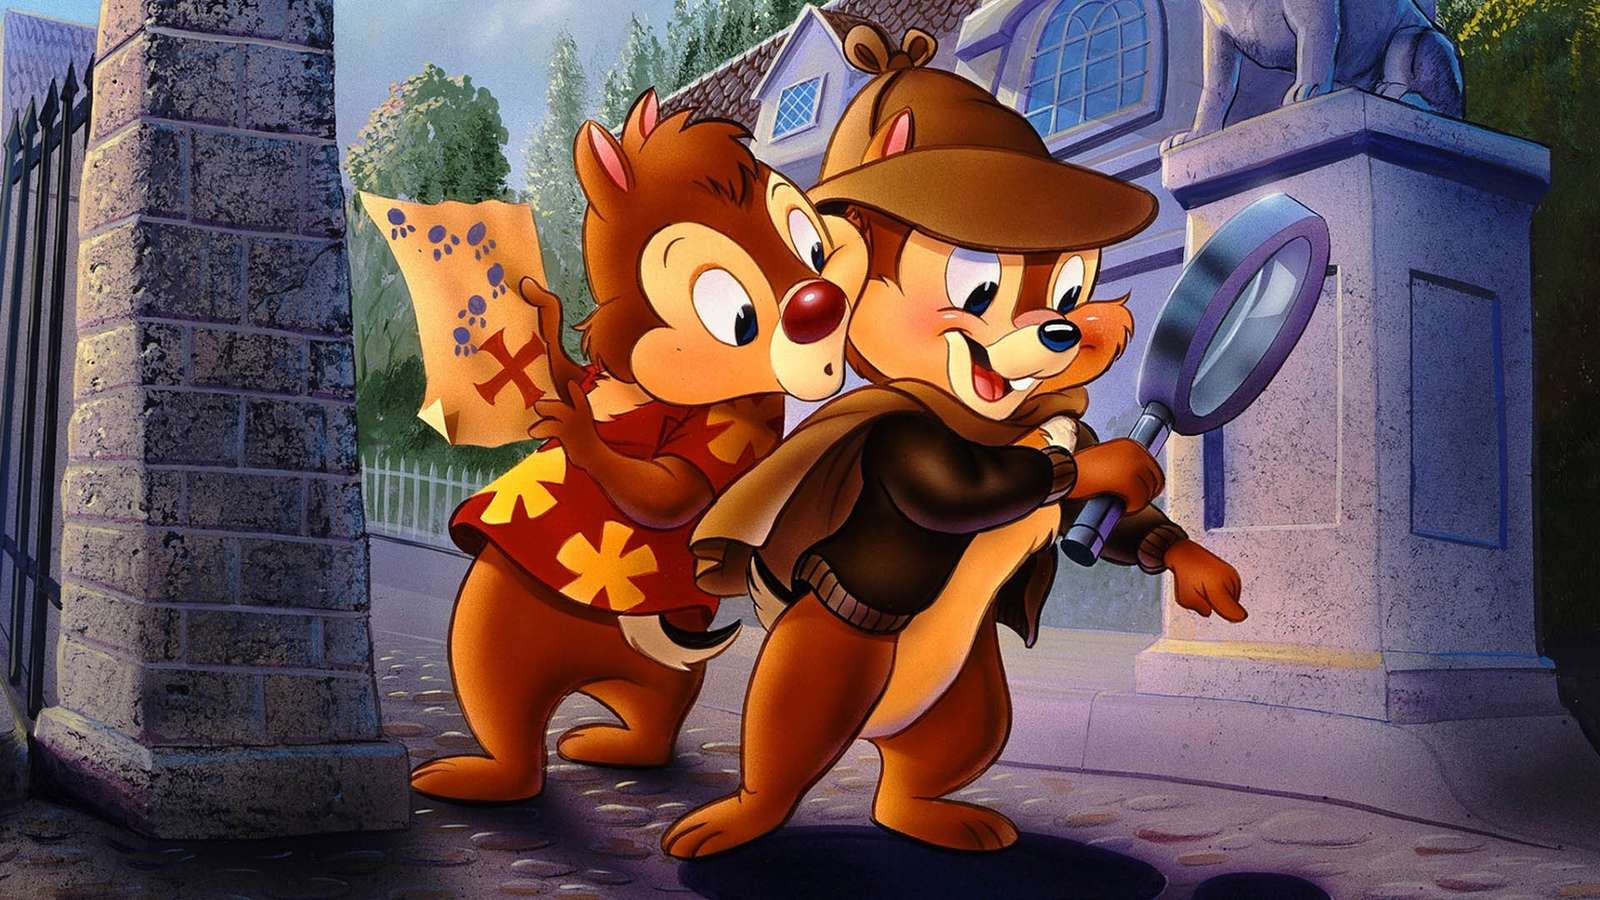 Dale and Chip online puzzle